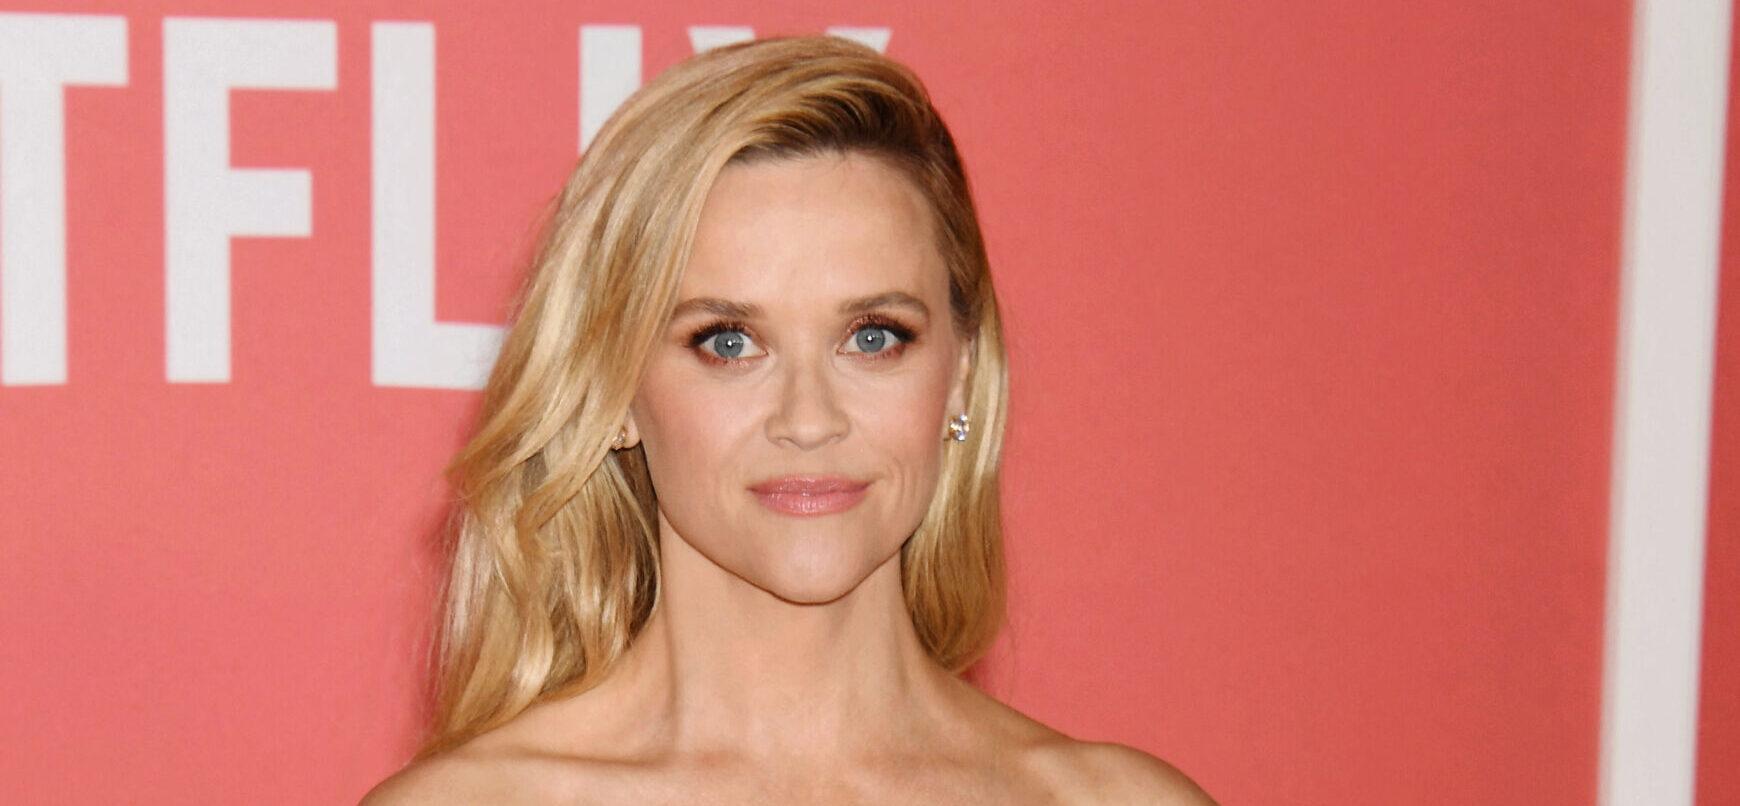 Reese Witherspoon Warns Parents to Delete Social Media Amid Fear of Hostage Videos From Hamas